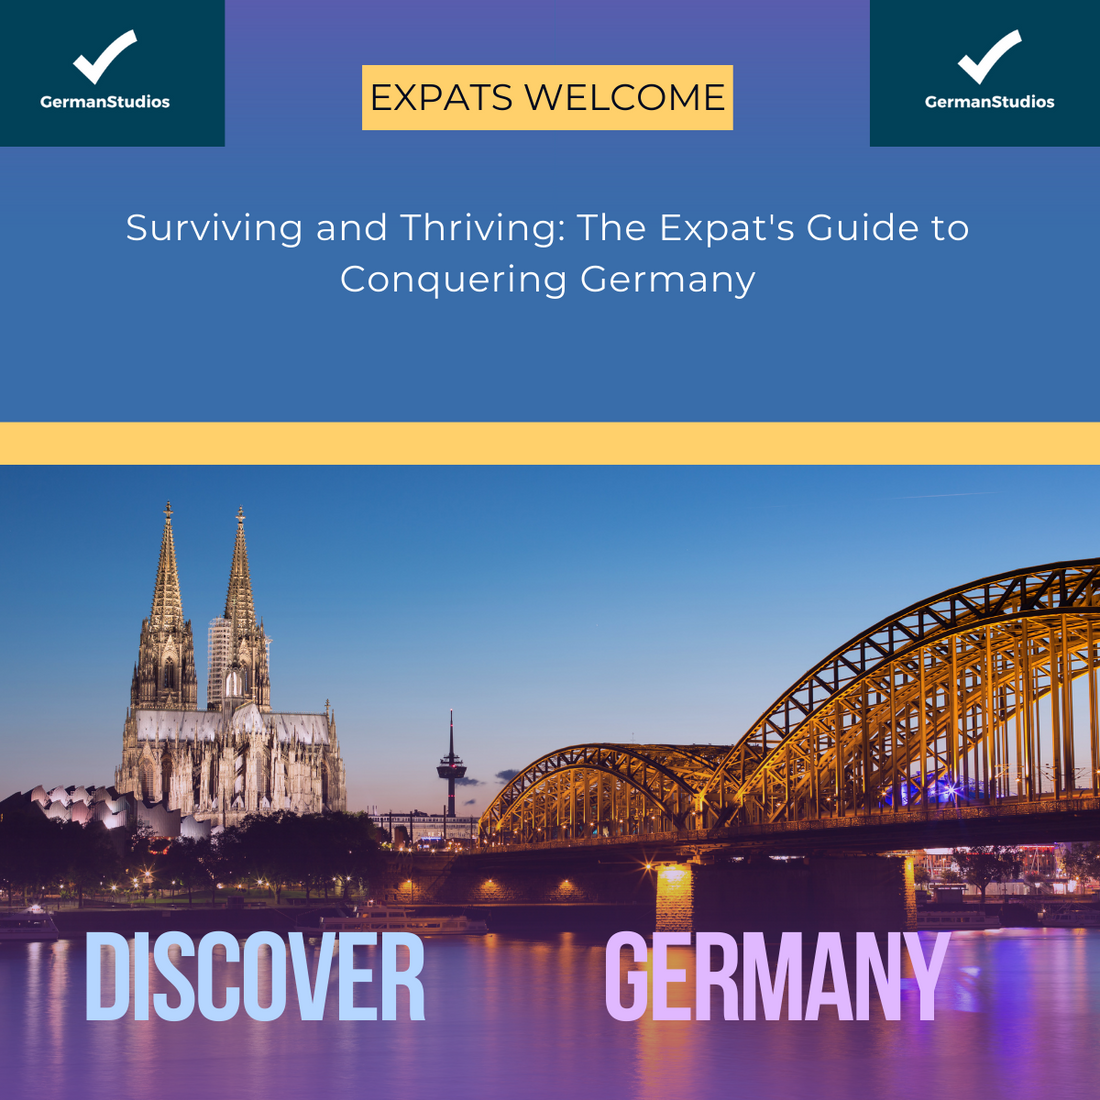 Surviving and Thriving: The Expat's Guide to Conquering Germany